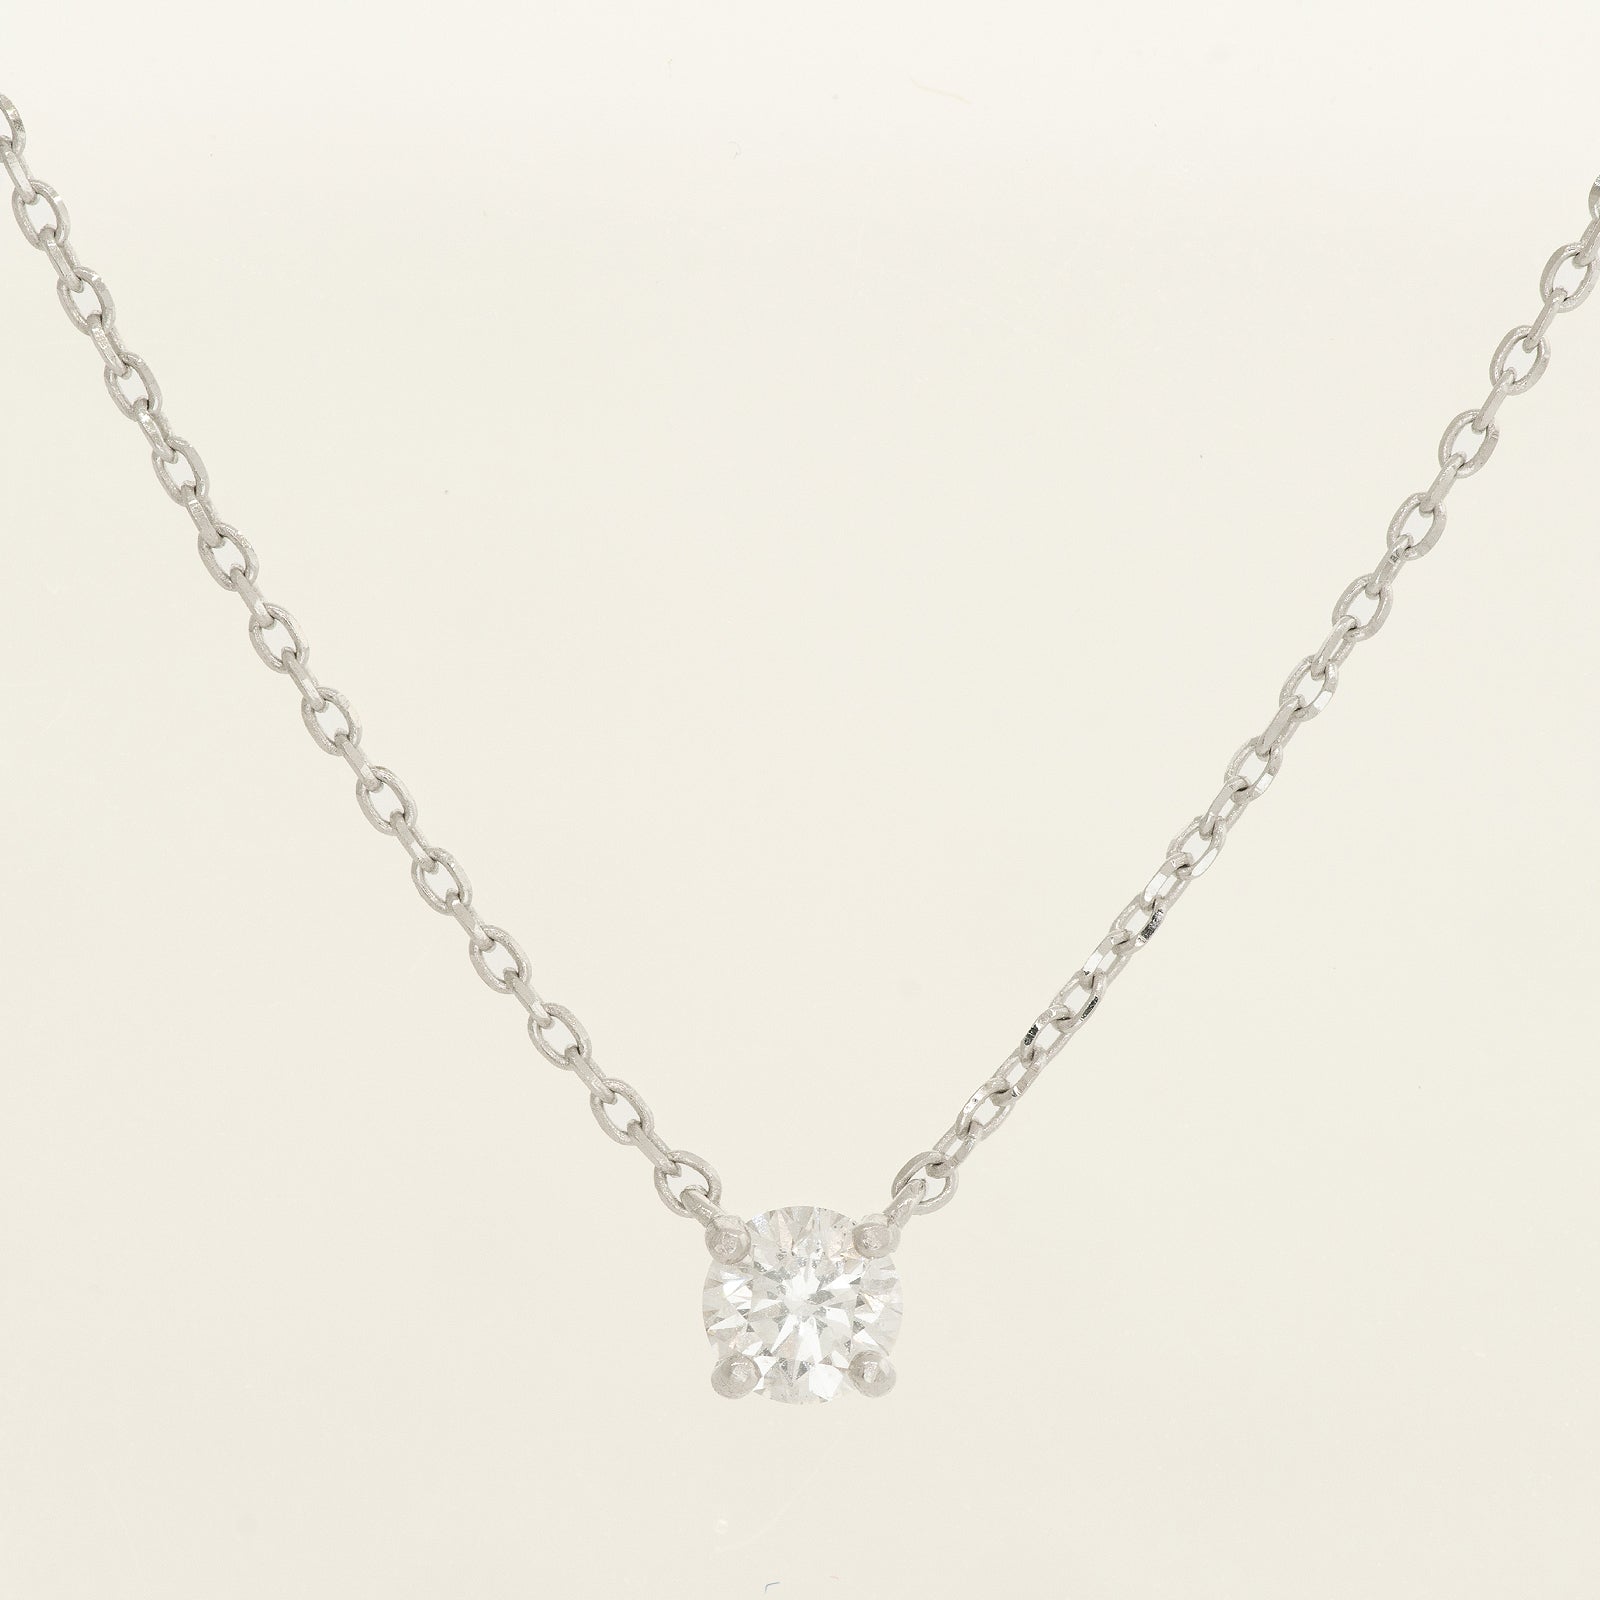 Simple White Gold and Diamond Chain Necklace